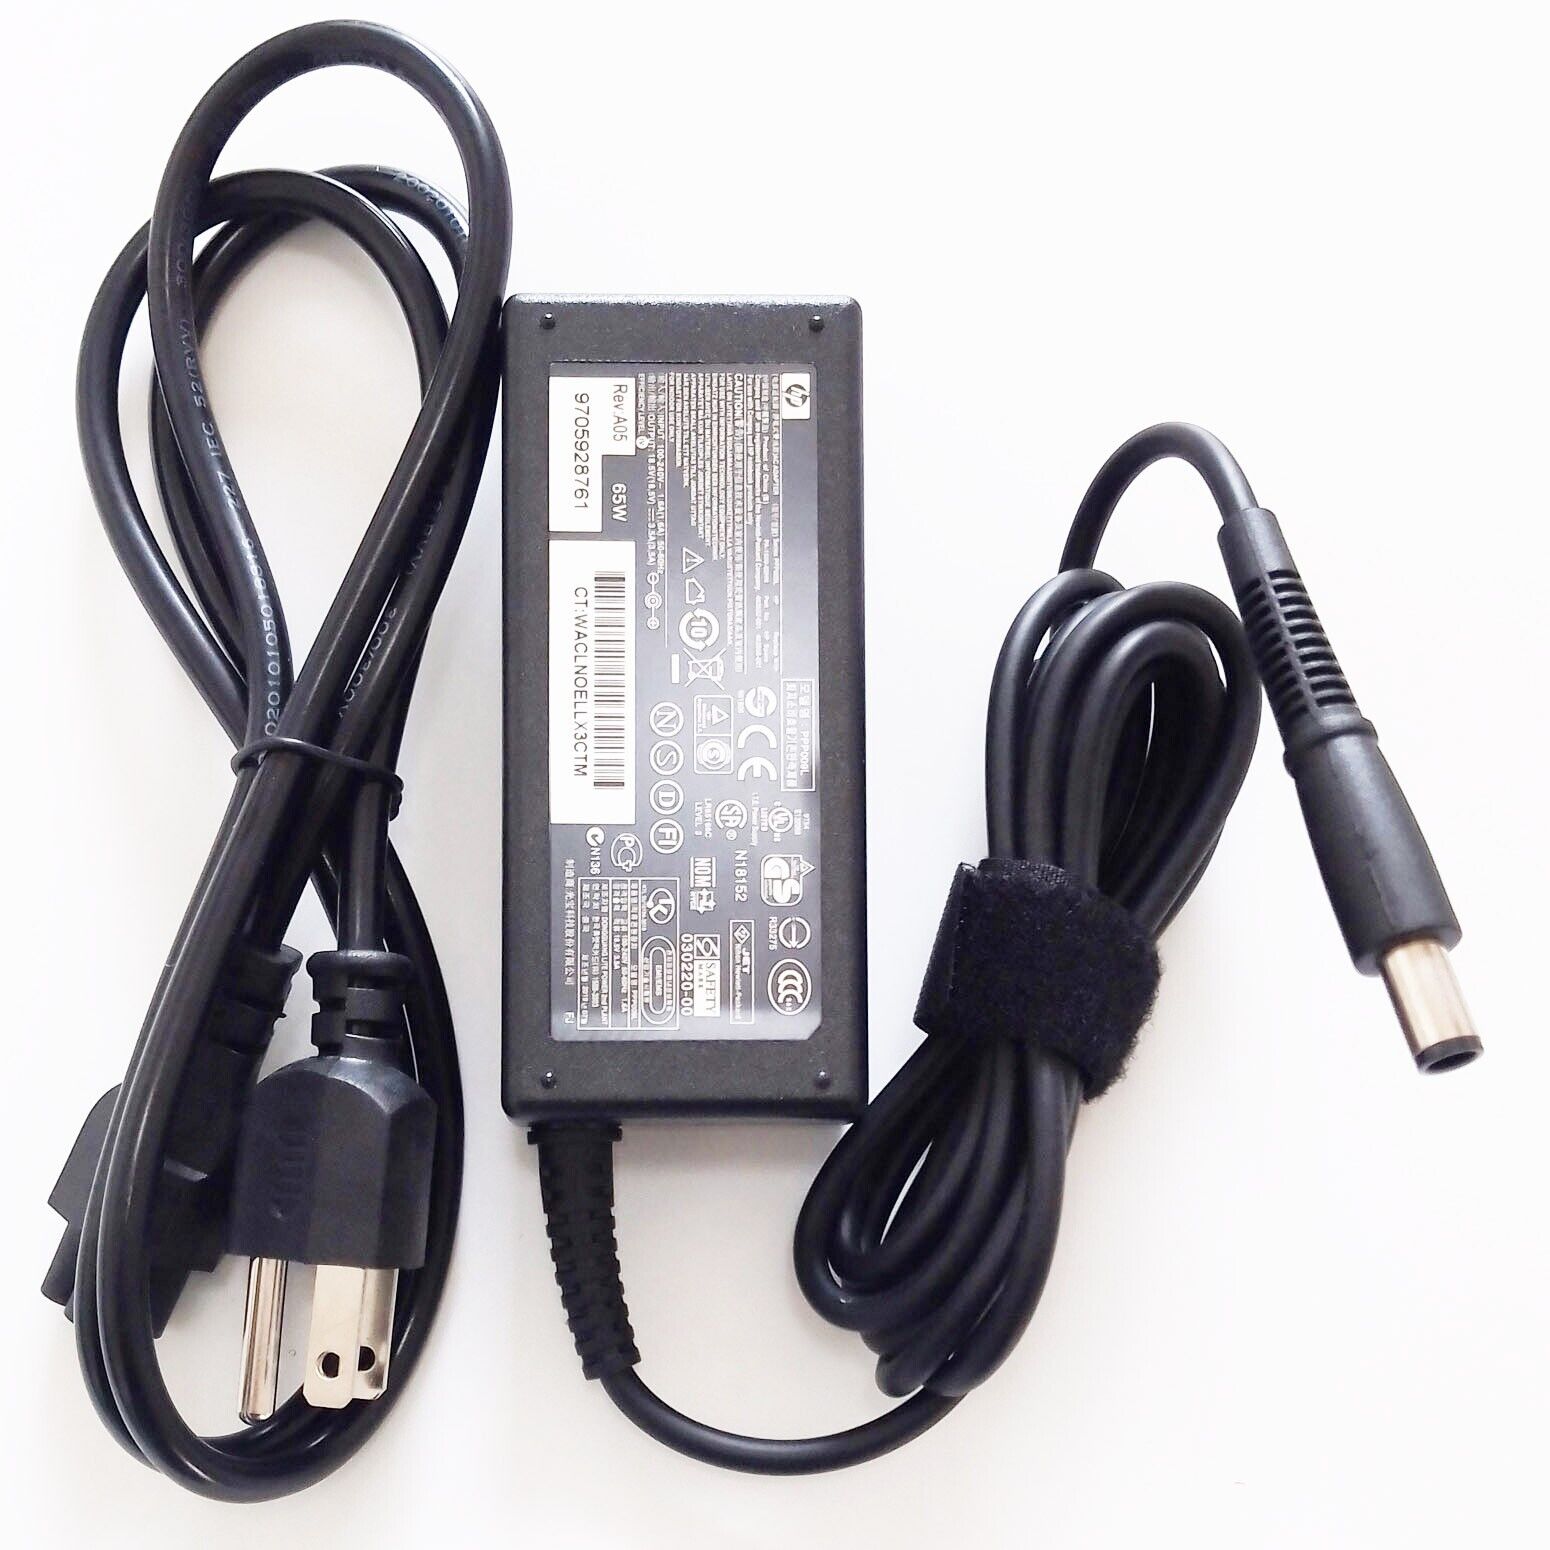 Genuine OEM 18.5V 65W Power Supply Charger For HP/Compaq 6730s 6735b 6735s 6830s